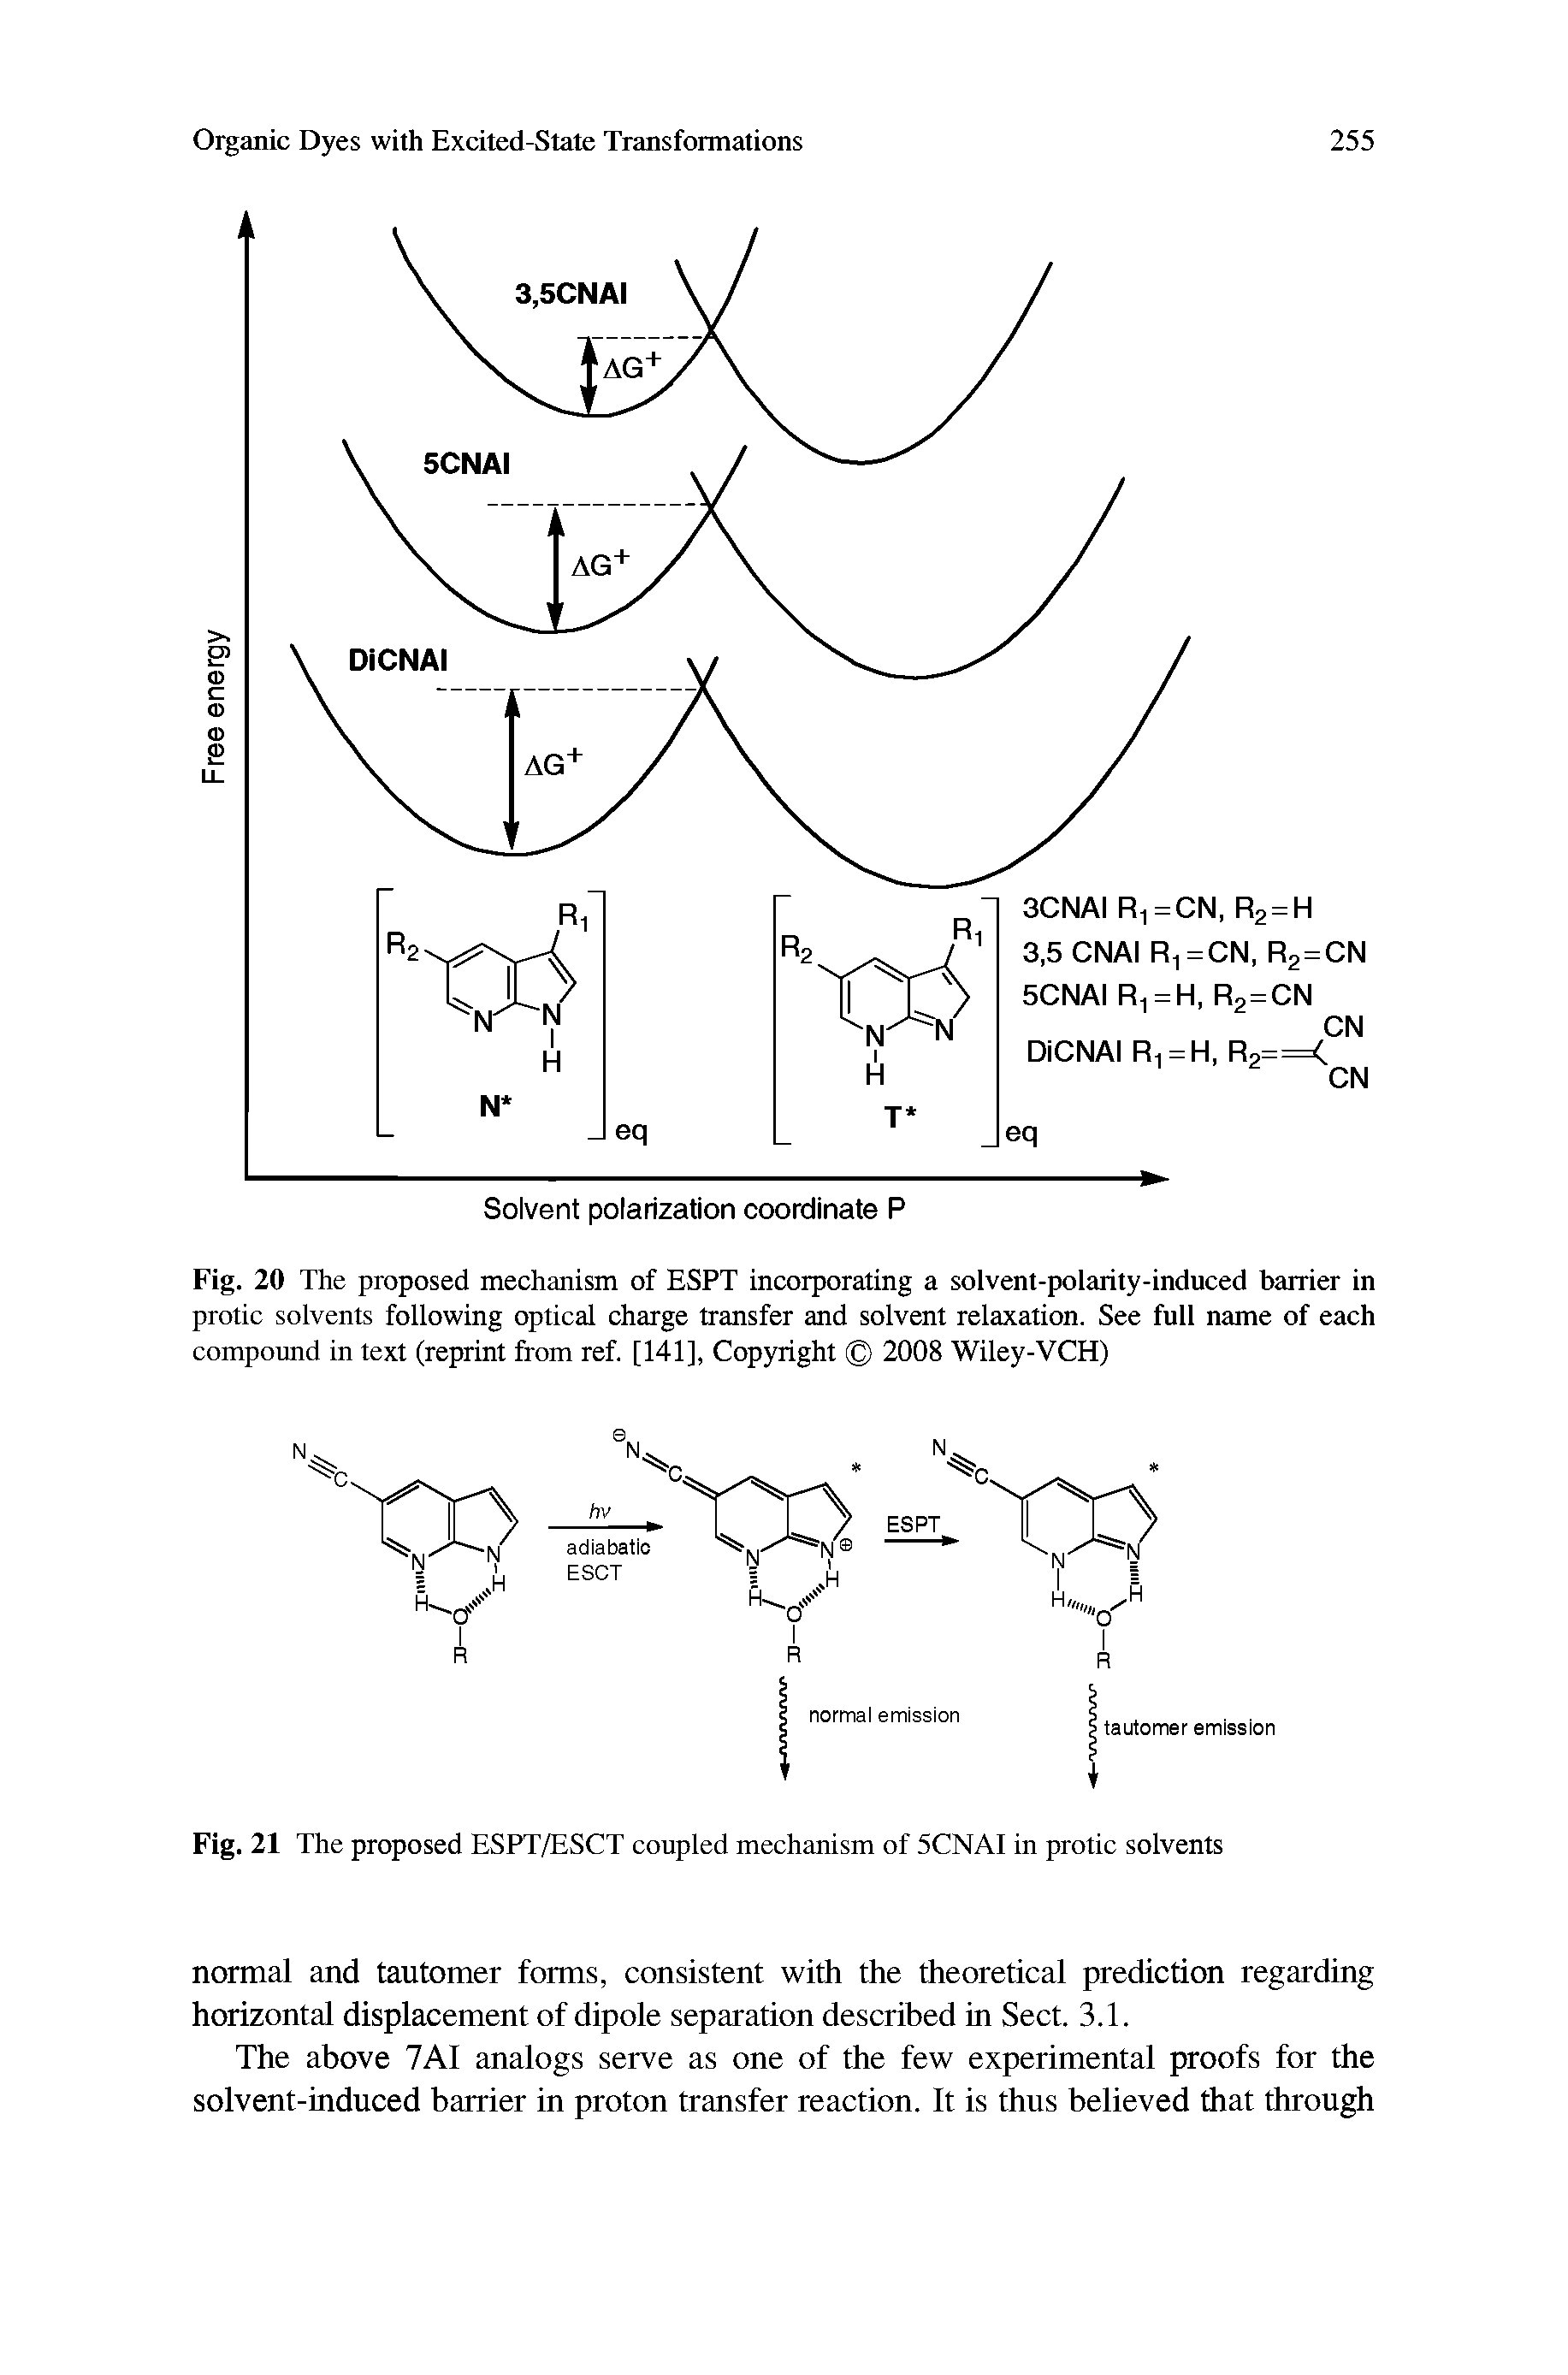 Fig. 20 The proposed mechanism of ESPT incorporating a solvent-polarity-induced barrier in protic solvents following optical charge transfer and solvent relaxation. See full name of each compound in text (reprint from ref. [141], Copyright 2008 Wiley-VCH)...